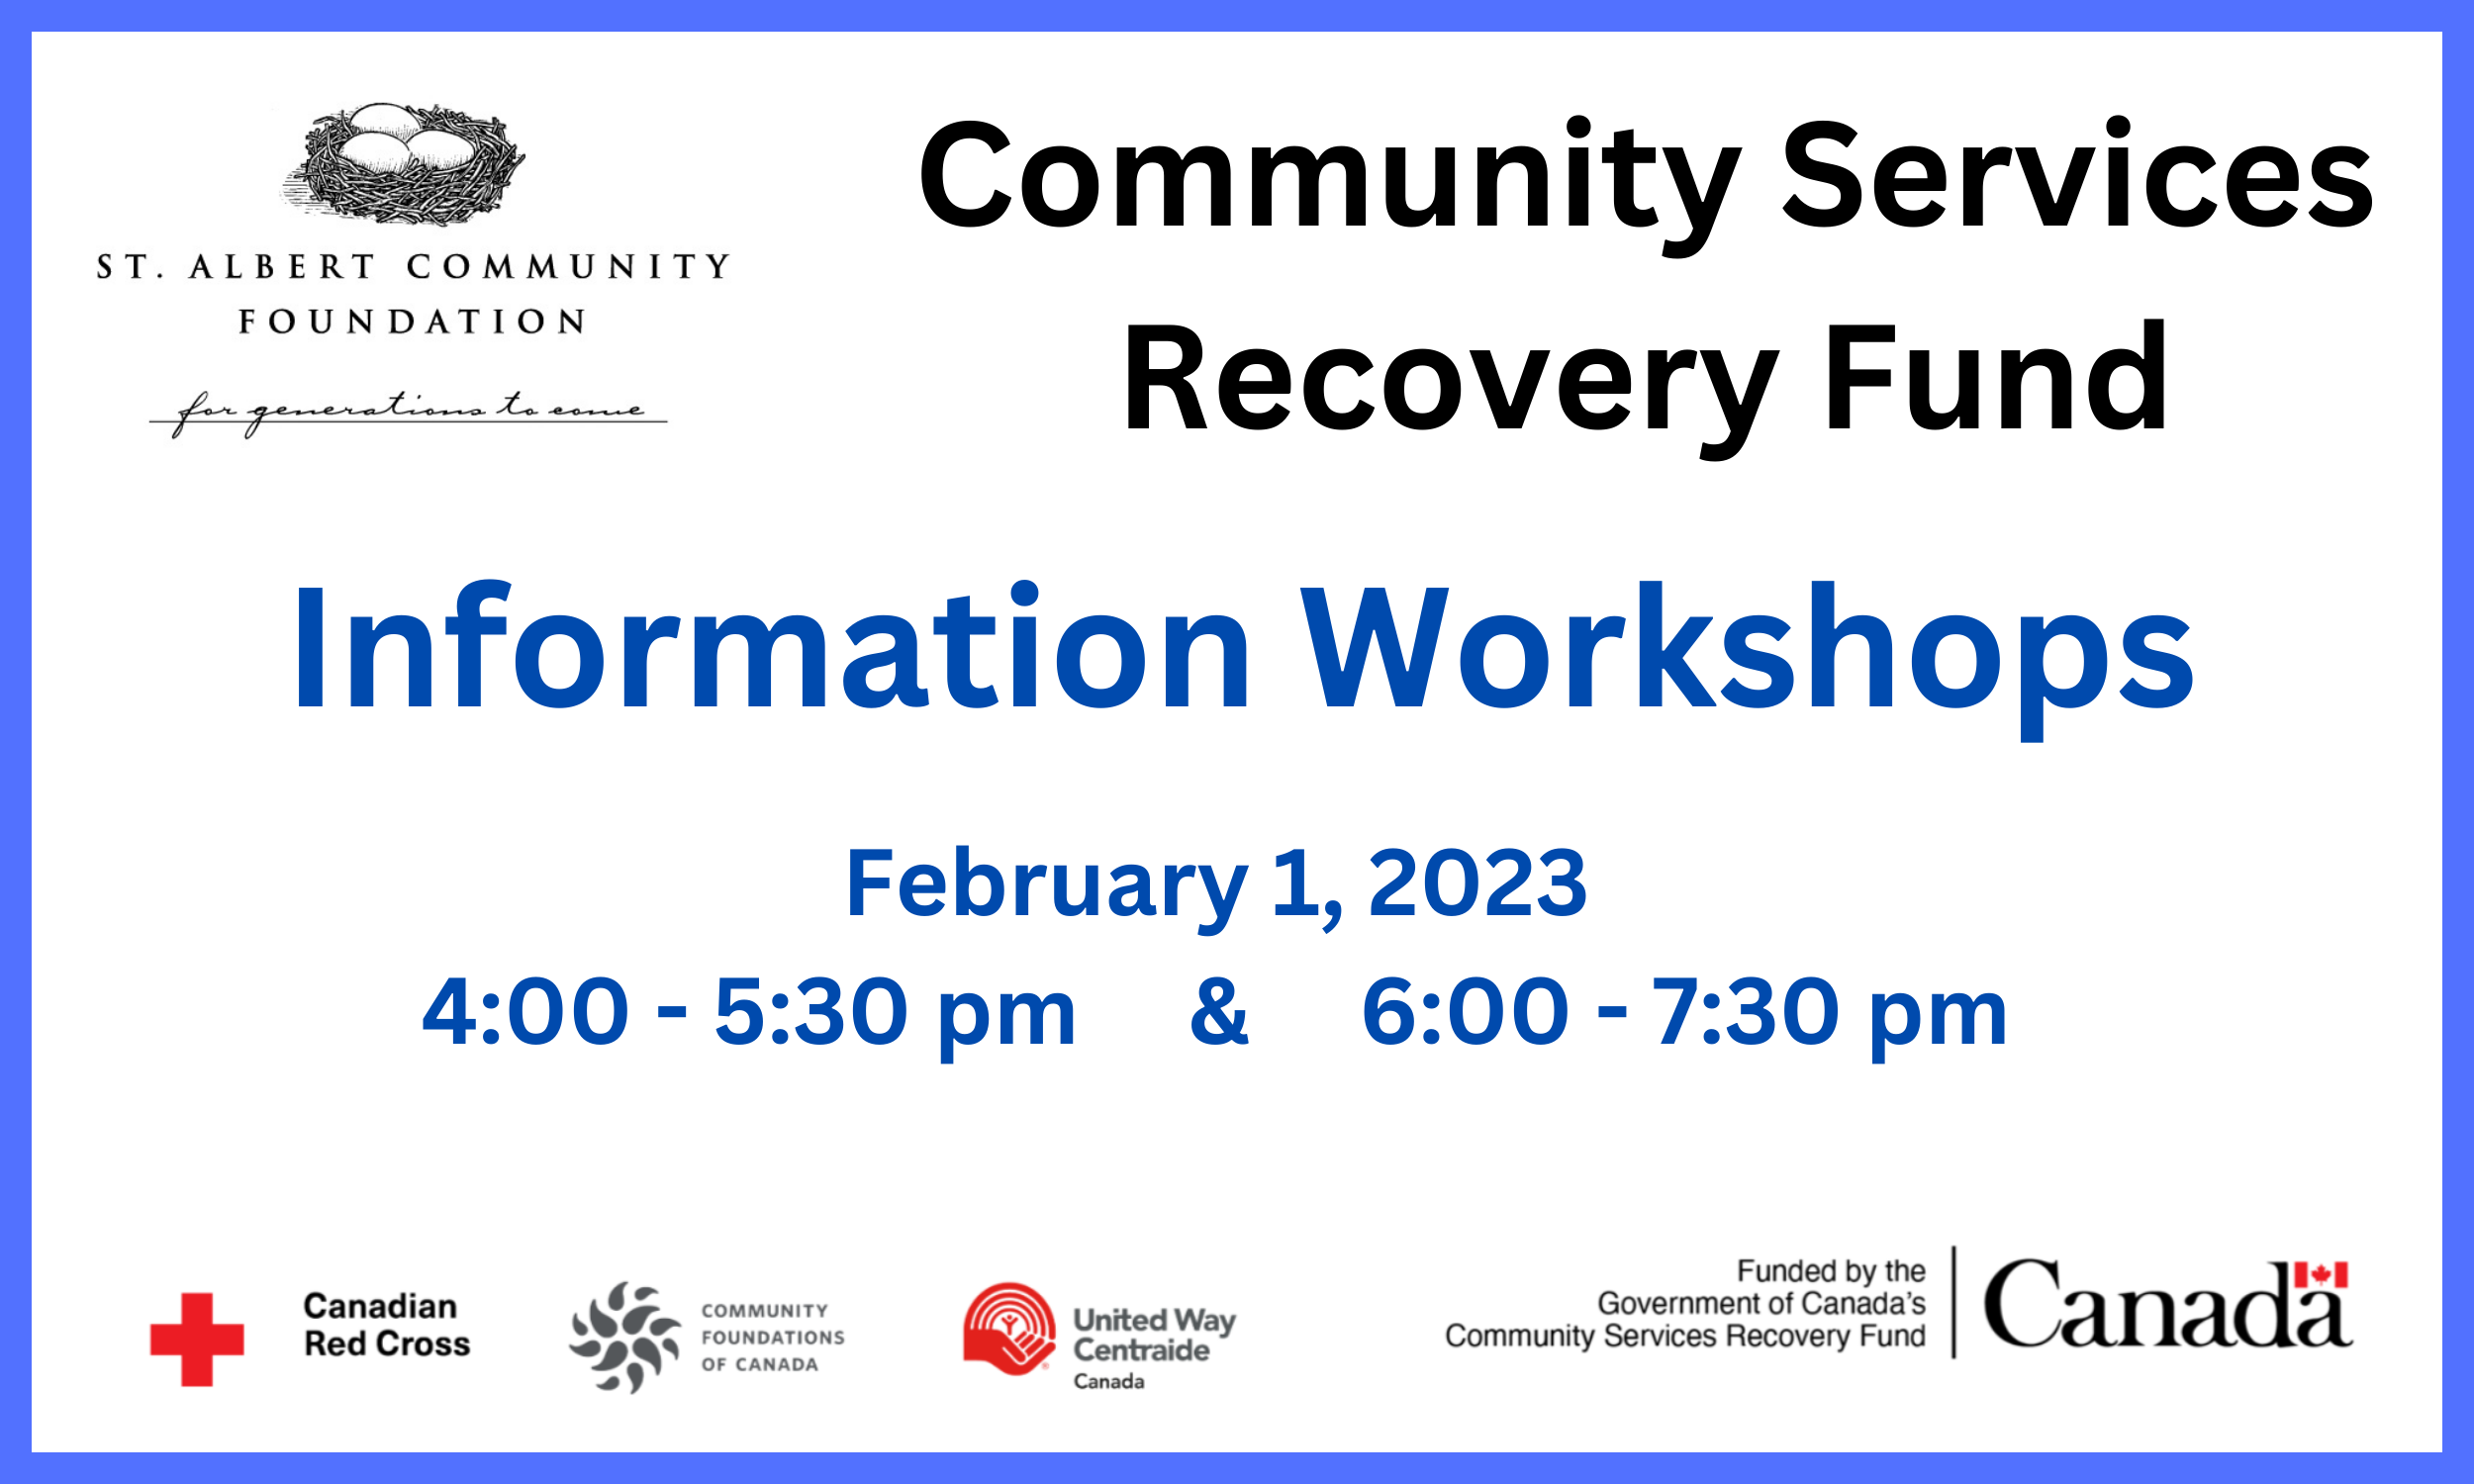 Community Services Recovery Fund Information Workshop